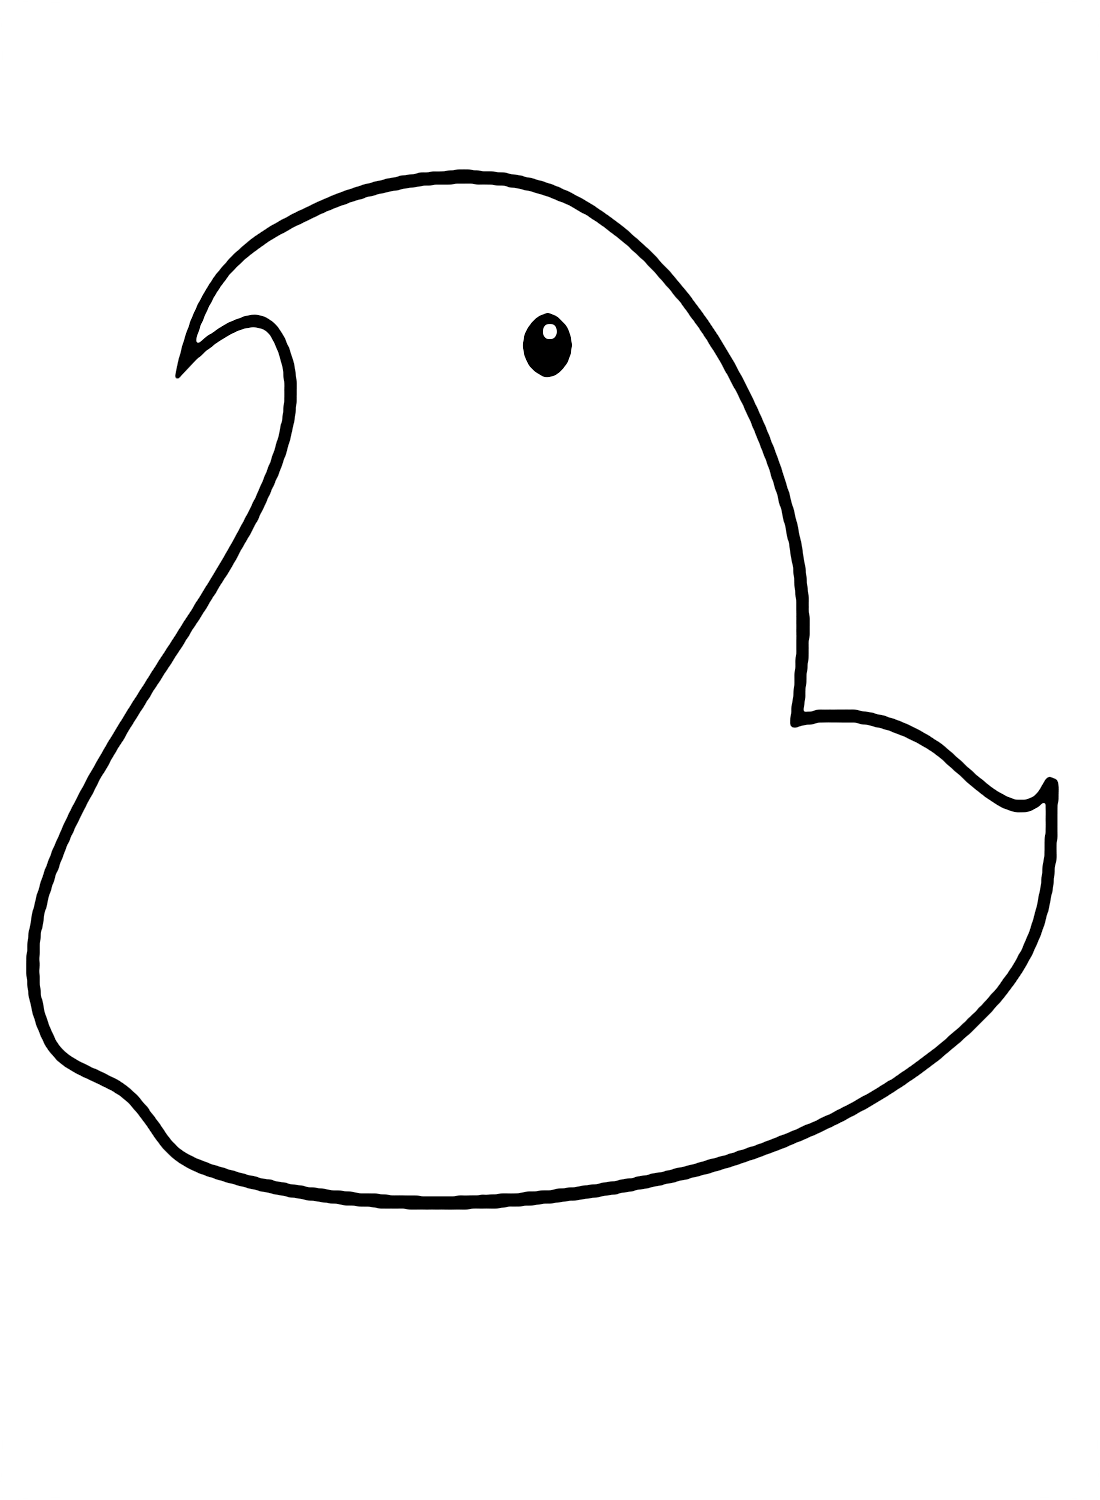 Marshmallow Peeps Chick Coloring Page